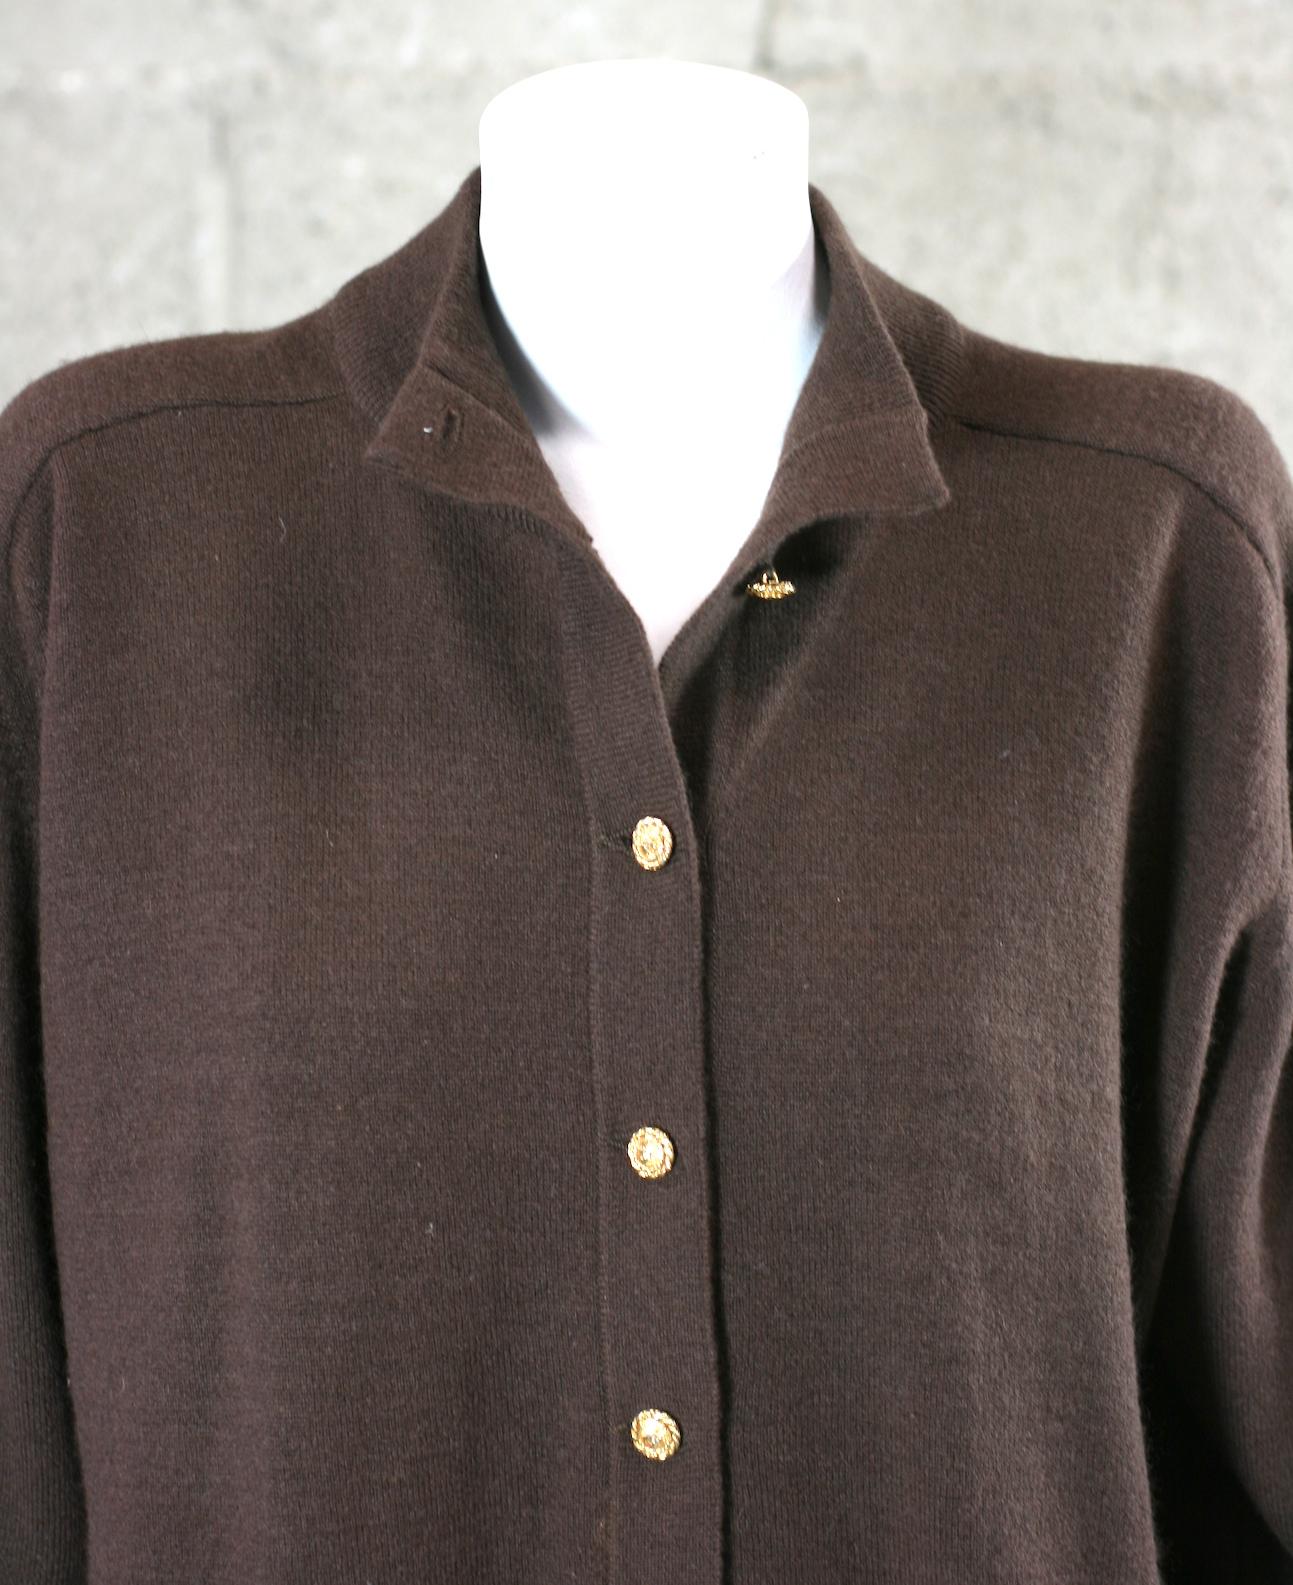 Chanel Cashmere Sweater Tunic from the 1990's. Deep chestnut cashmere knit with gold CC logo buttons. The bottom button has been replaced with a genuine CC button and is not noticeable when worn. Longer length great with leggings and jeans. 
Size 40